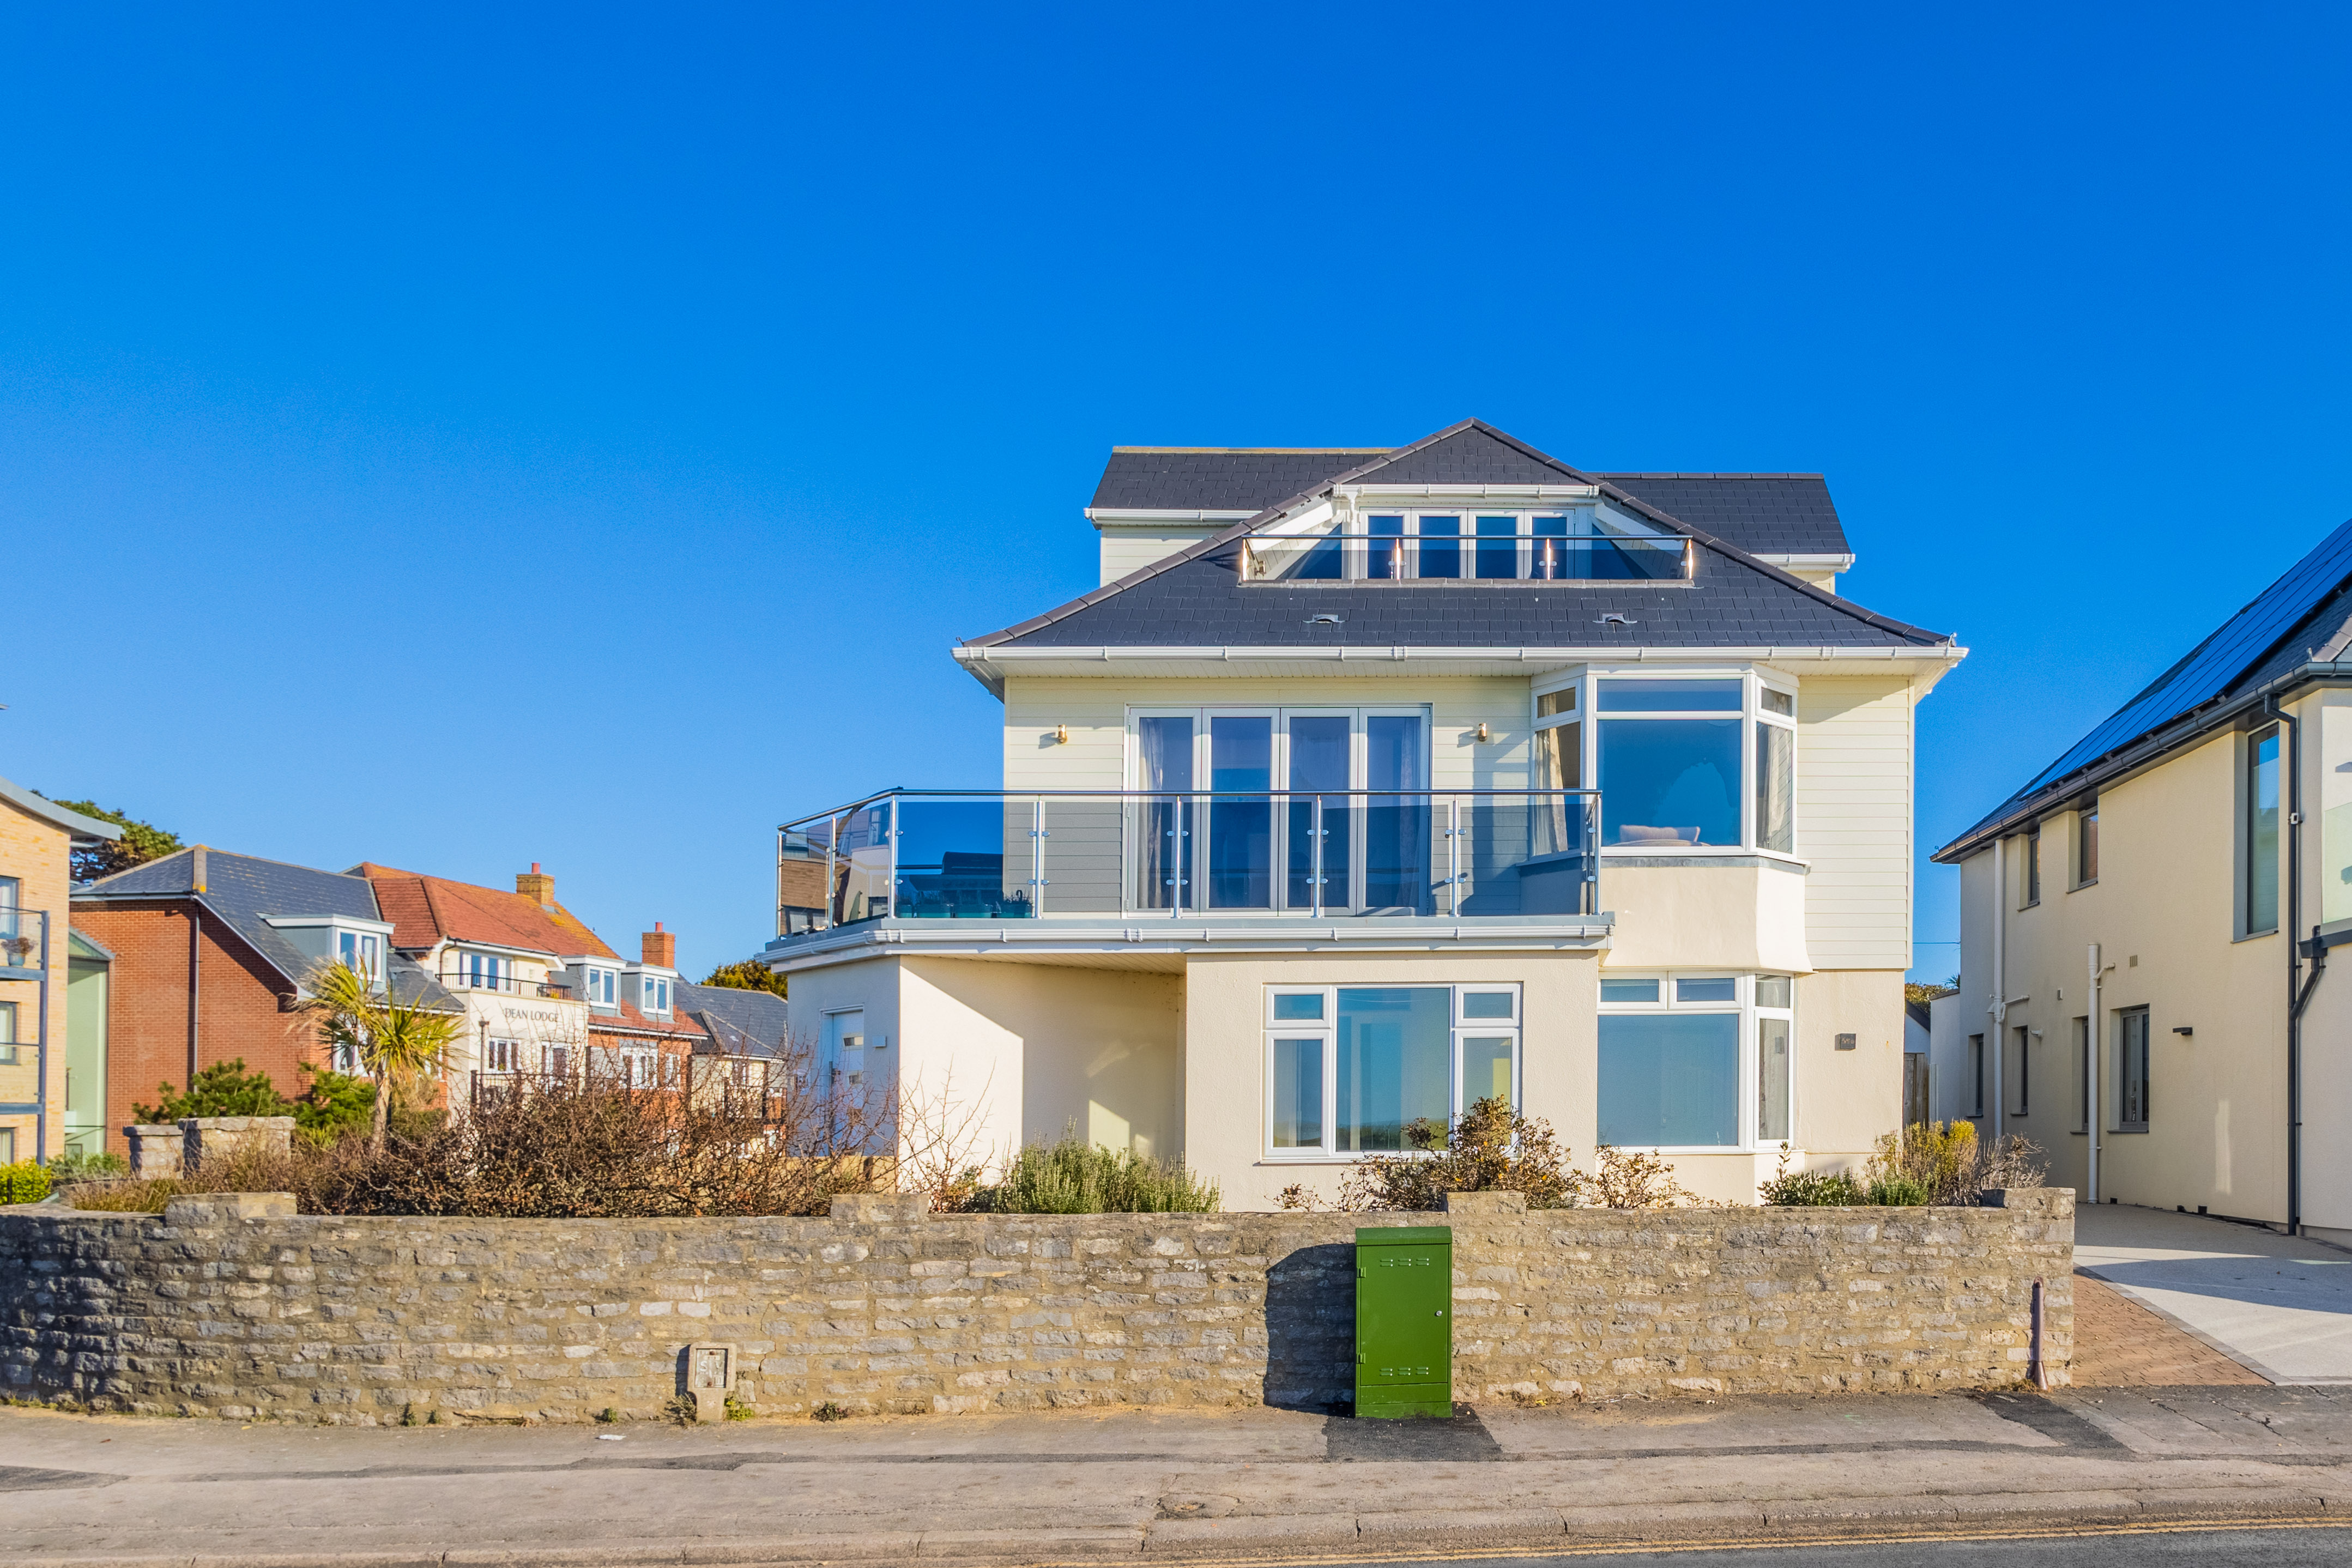 Southbourne Overcliff Drive, Southbourne, Bourmnemouth, BH6 3NN